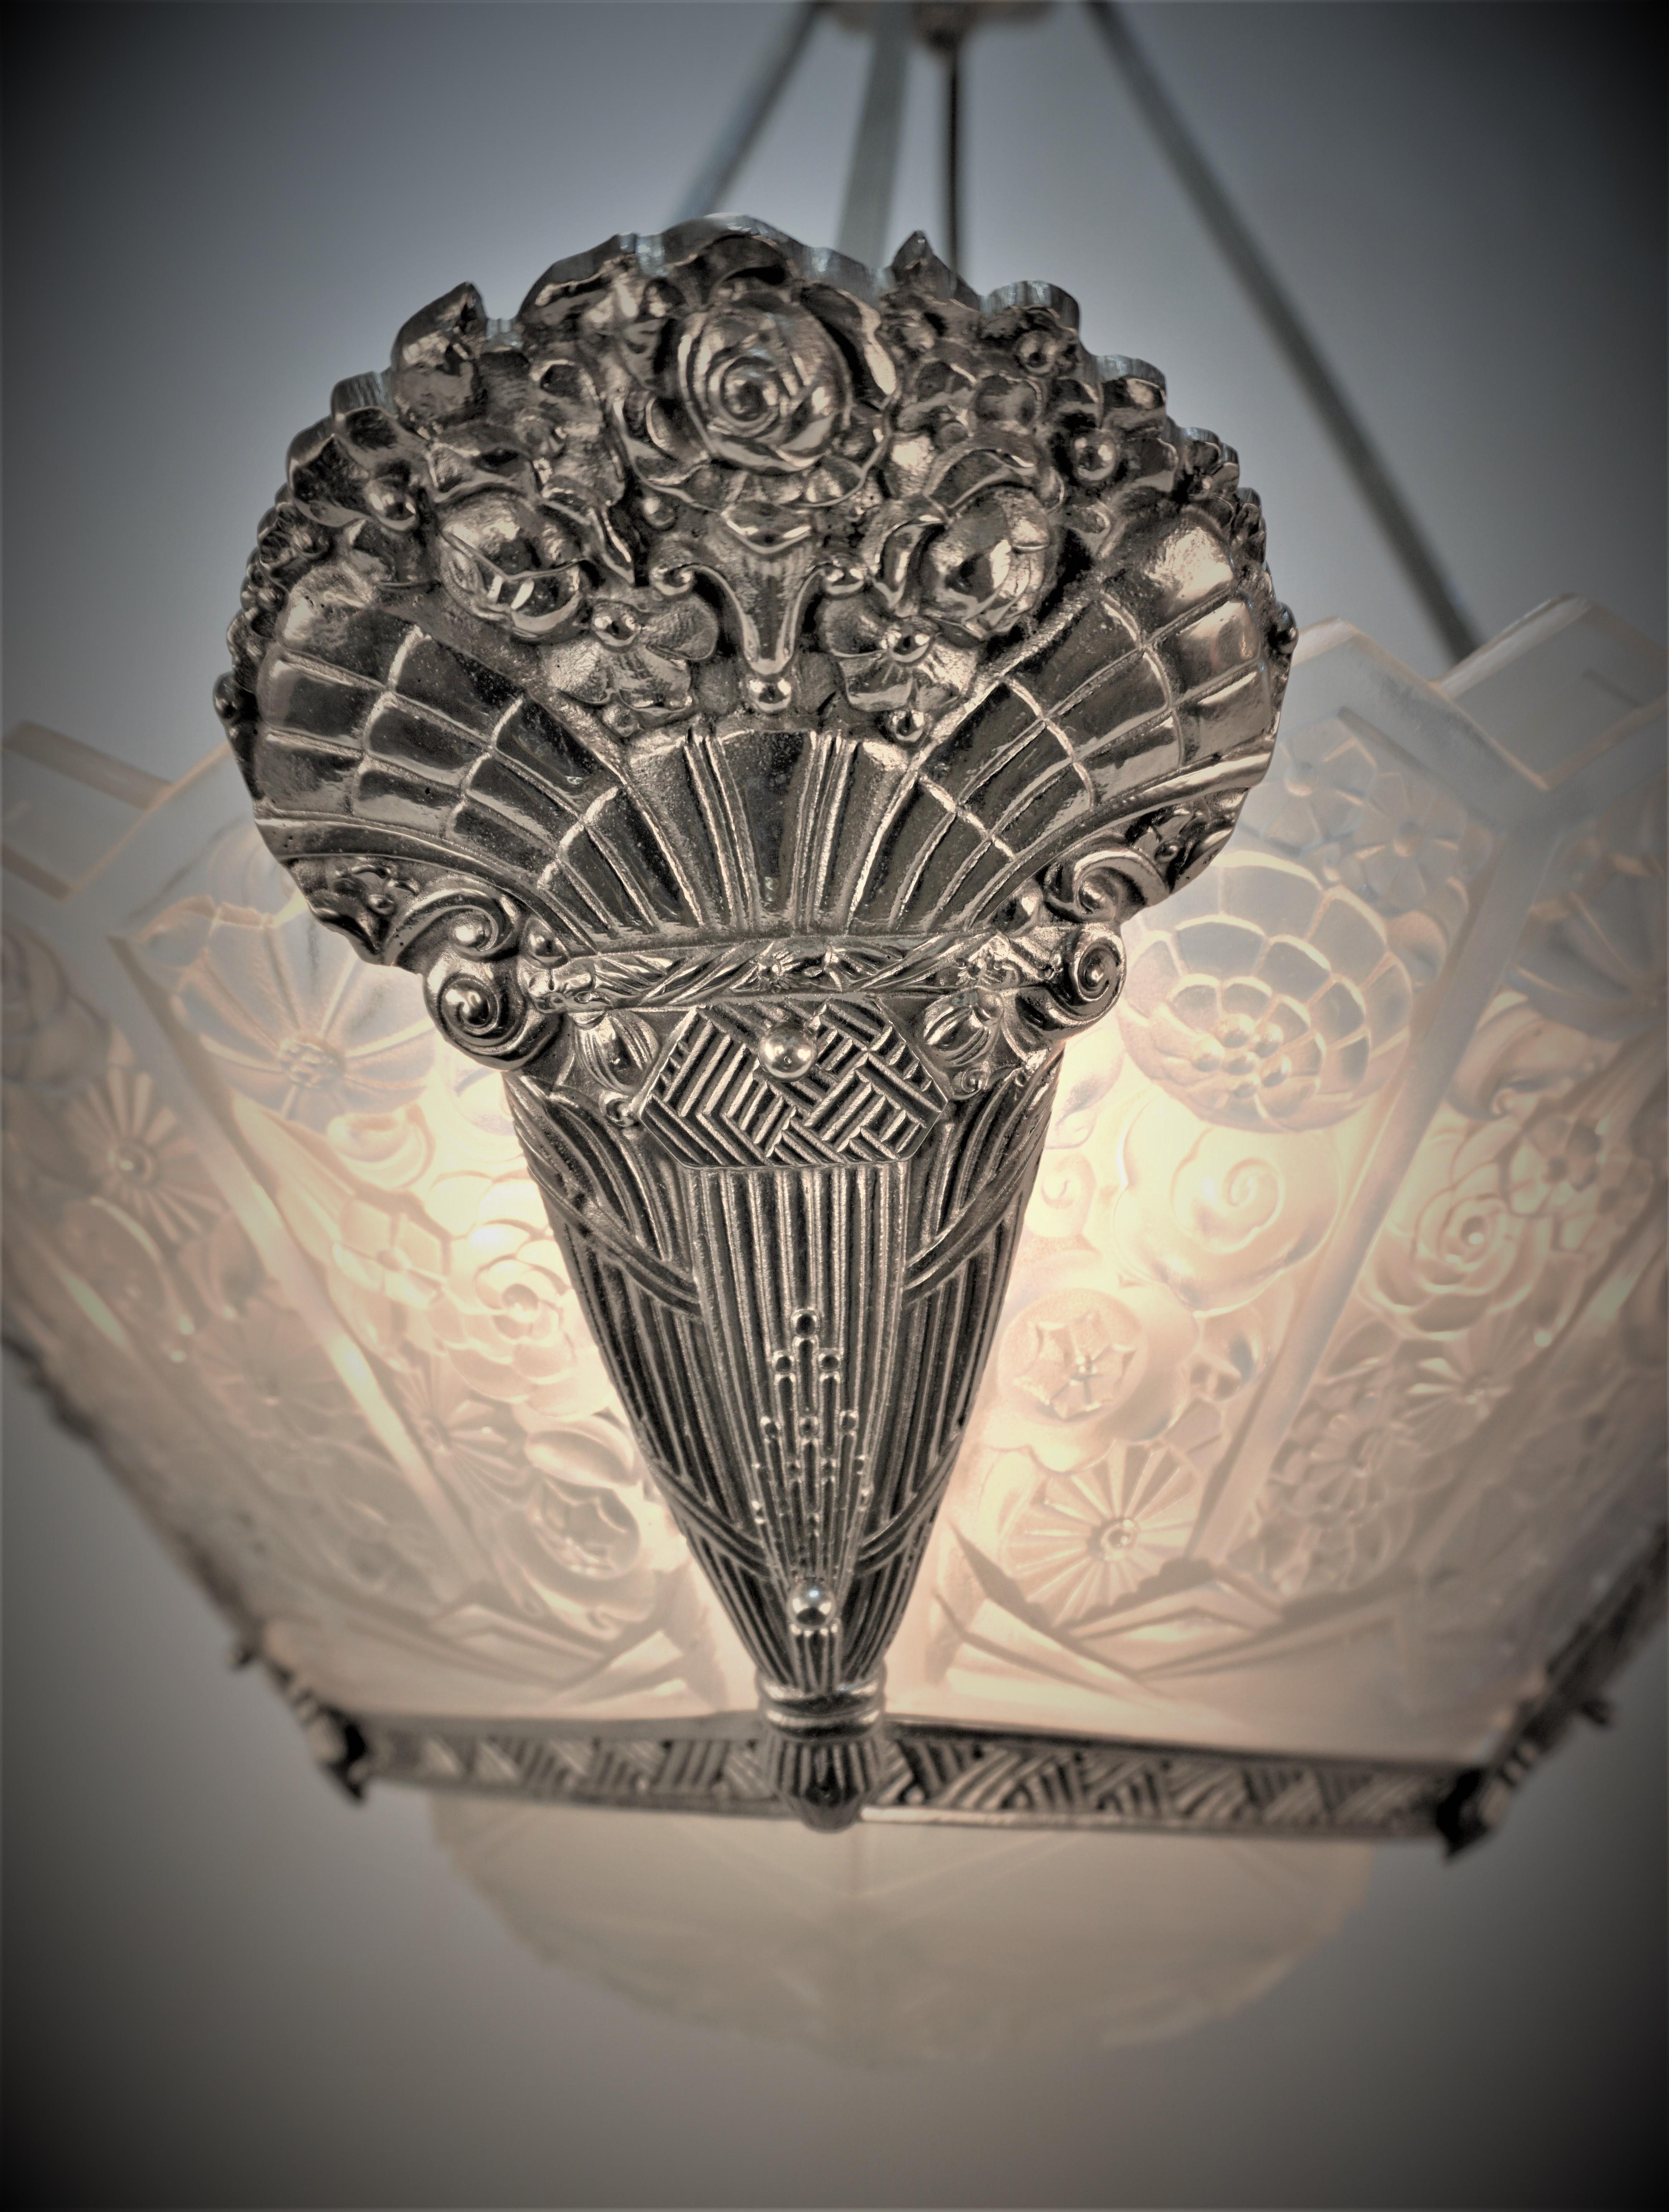 Early 20th Century French 1920's Art Deco Chandelier For Sale